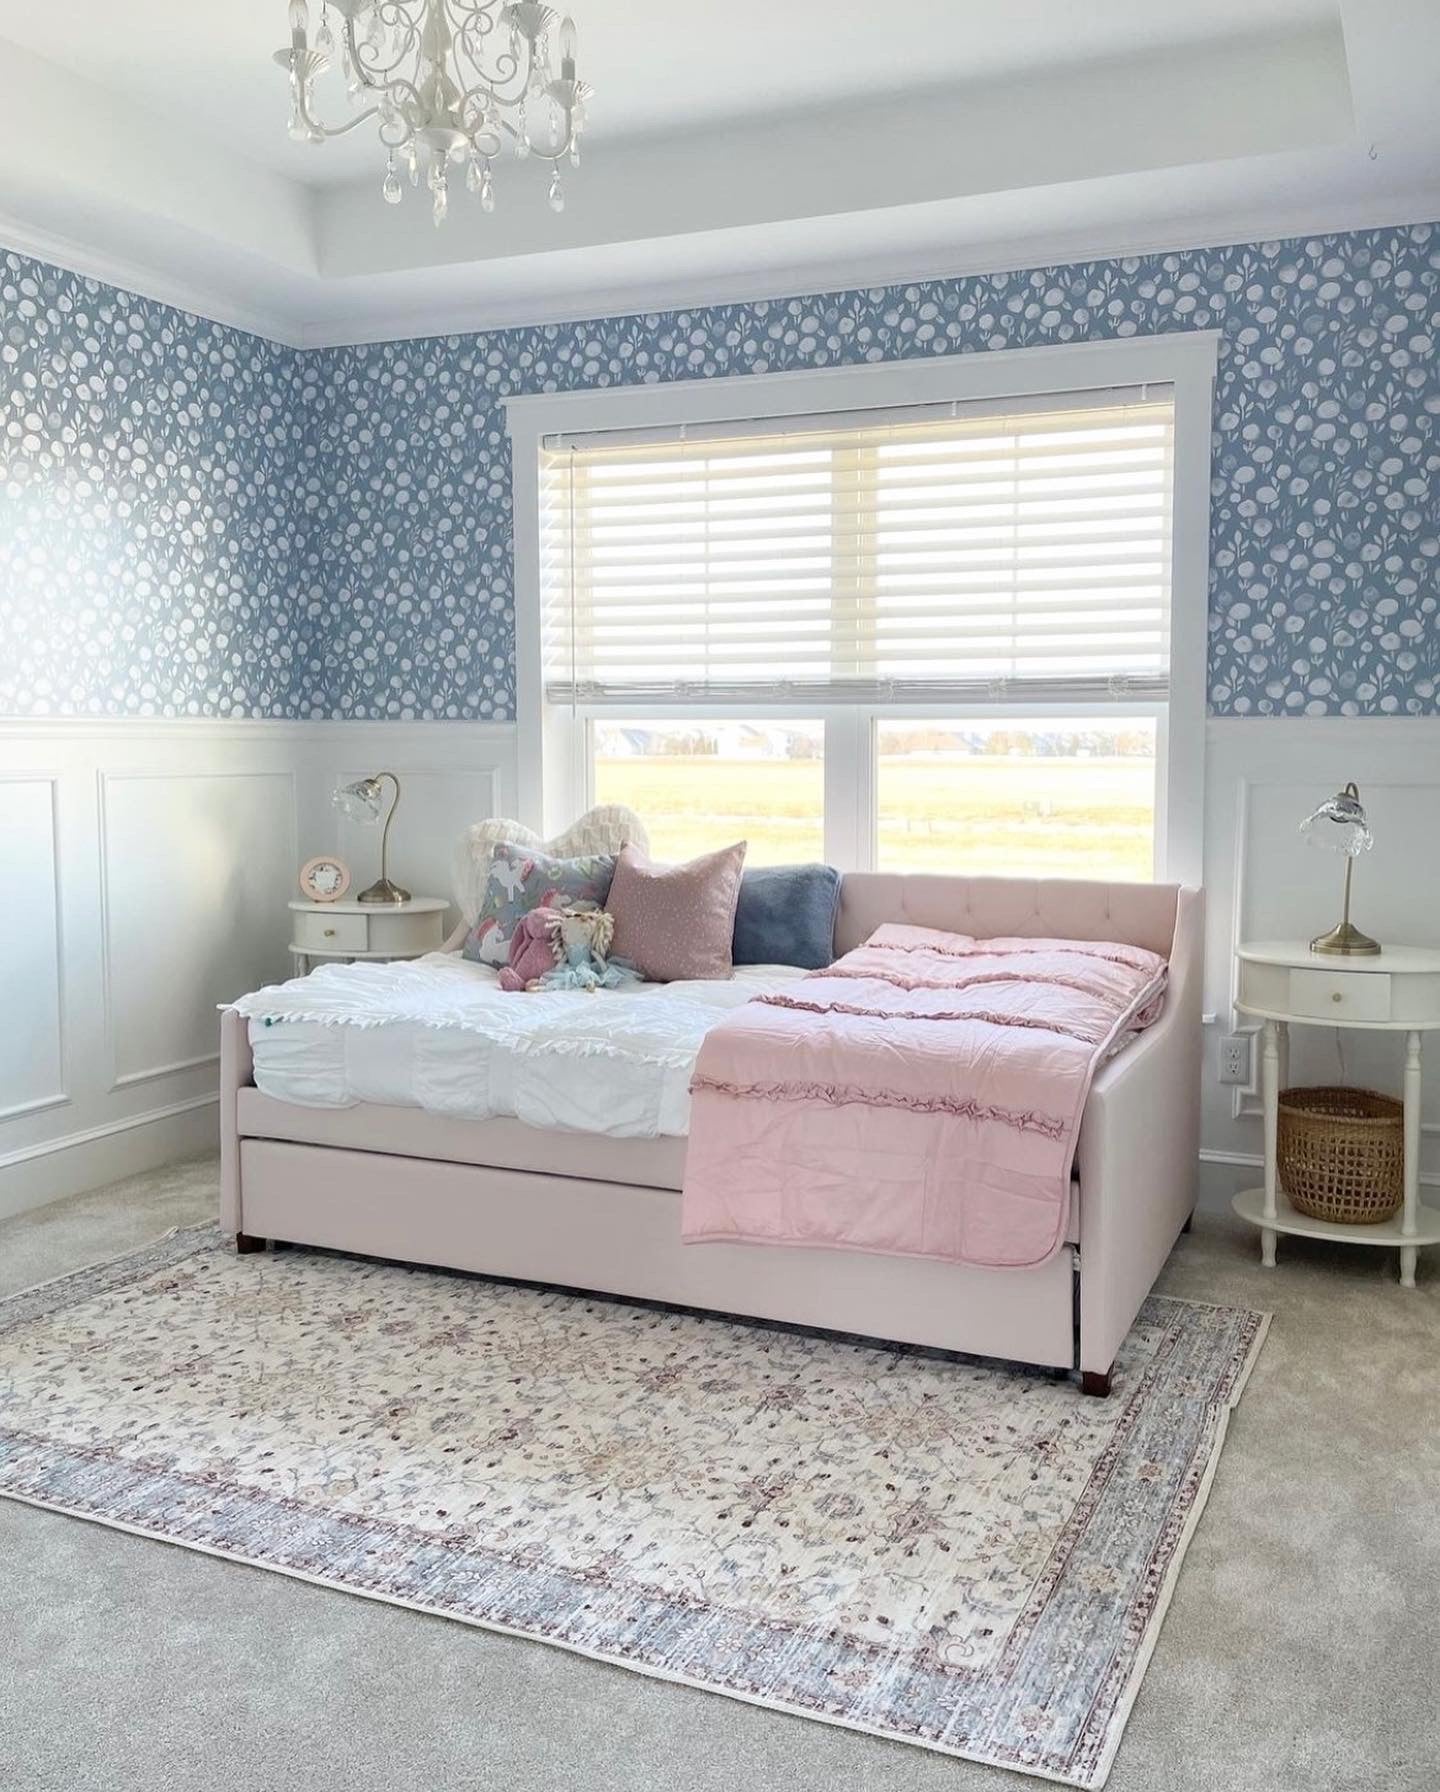 A light and airy bedroom with 'Subtle Botanica II - Inverted' wallpaper featuring a soothing pattern of white botanical silhouettes against a soft blue-grey background. The room is elegantly styled with a blush pink upholstered bed, a white bedside table, and a patterned rug, enhancing the serene aesthetic.